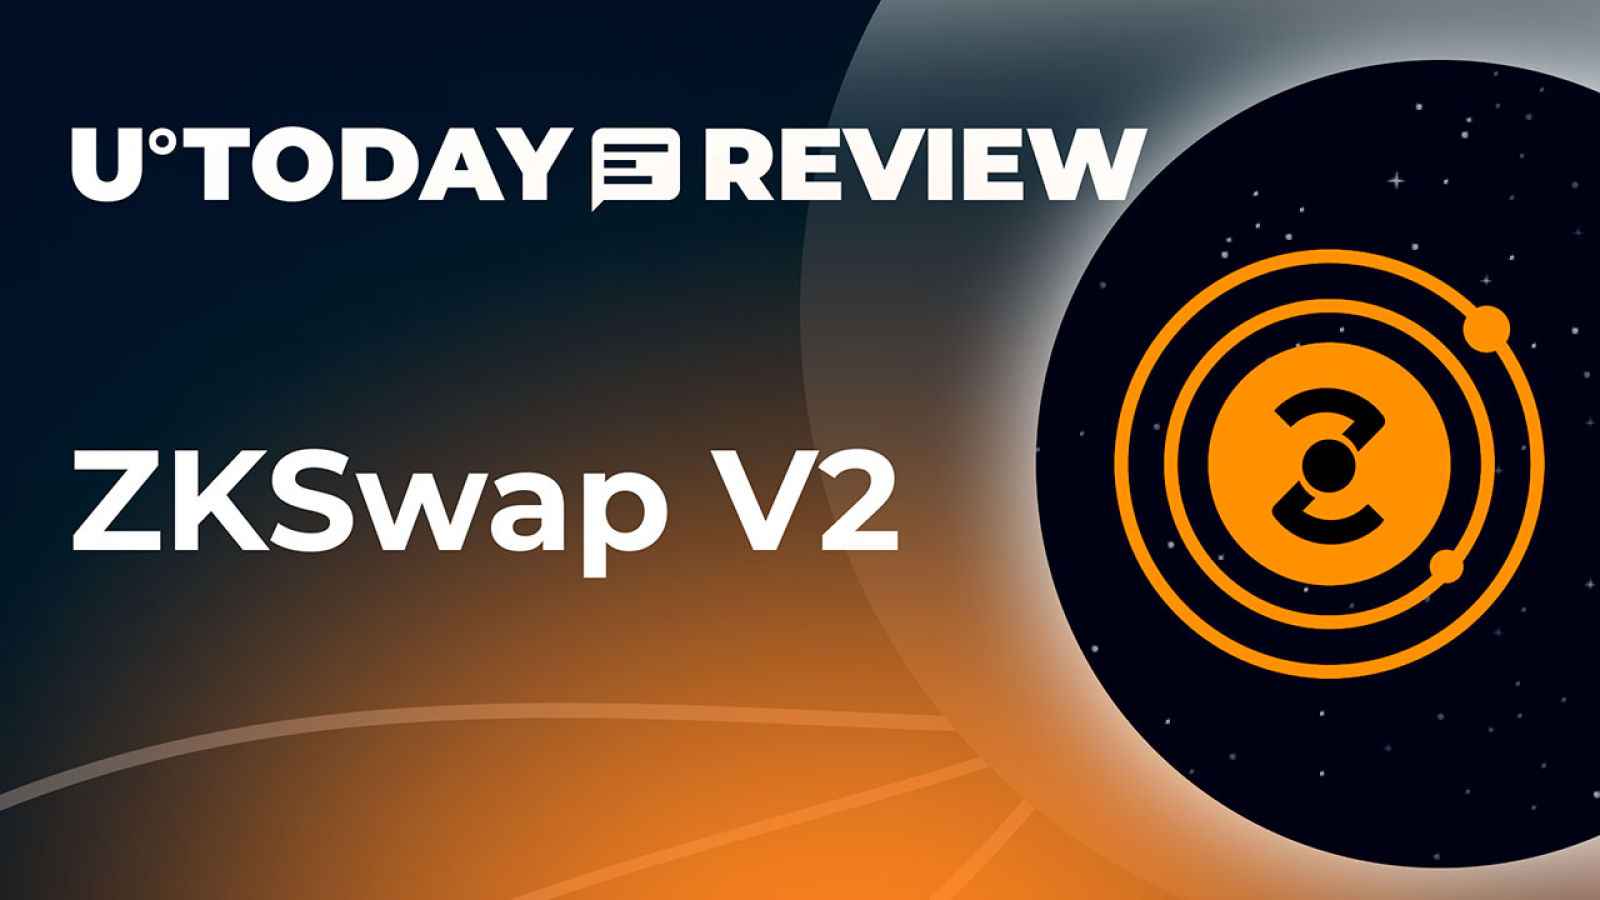 ZKSwap V2 Whitepaper Review: What’s Under Hood of Layer 2 DEX with AMM